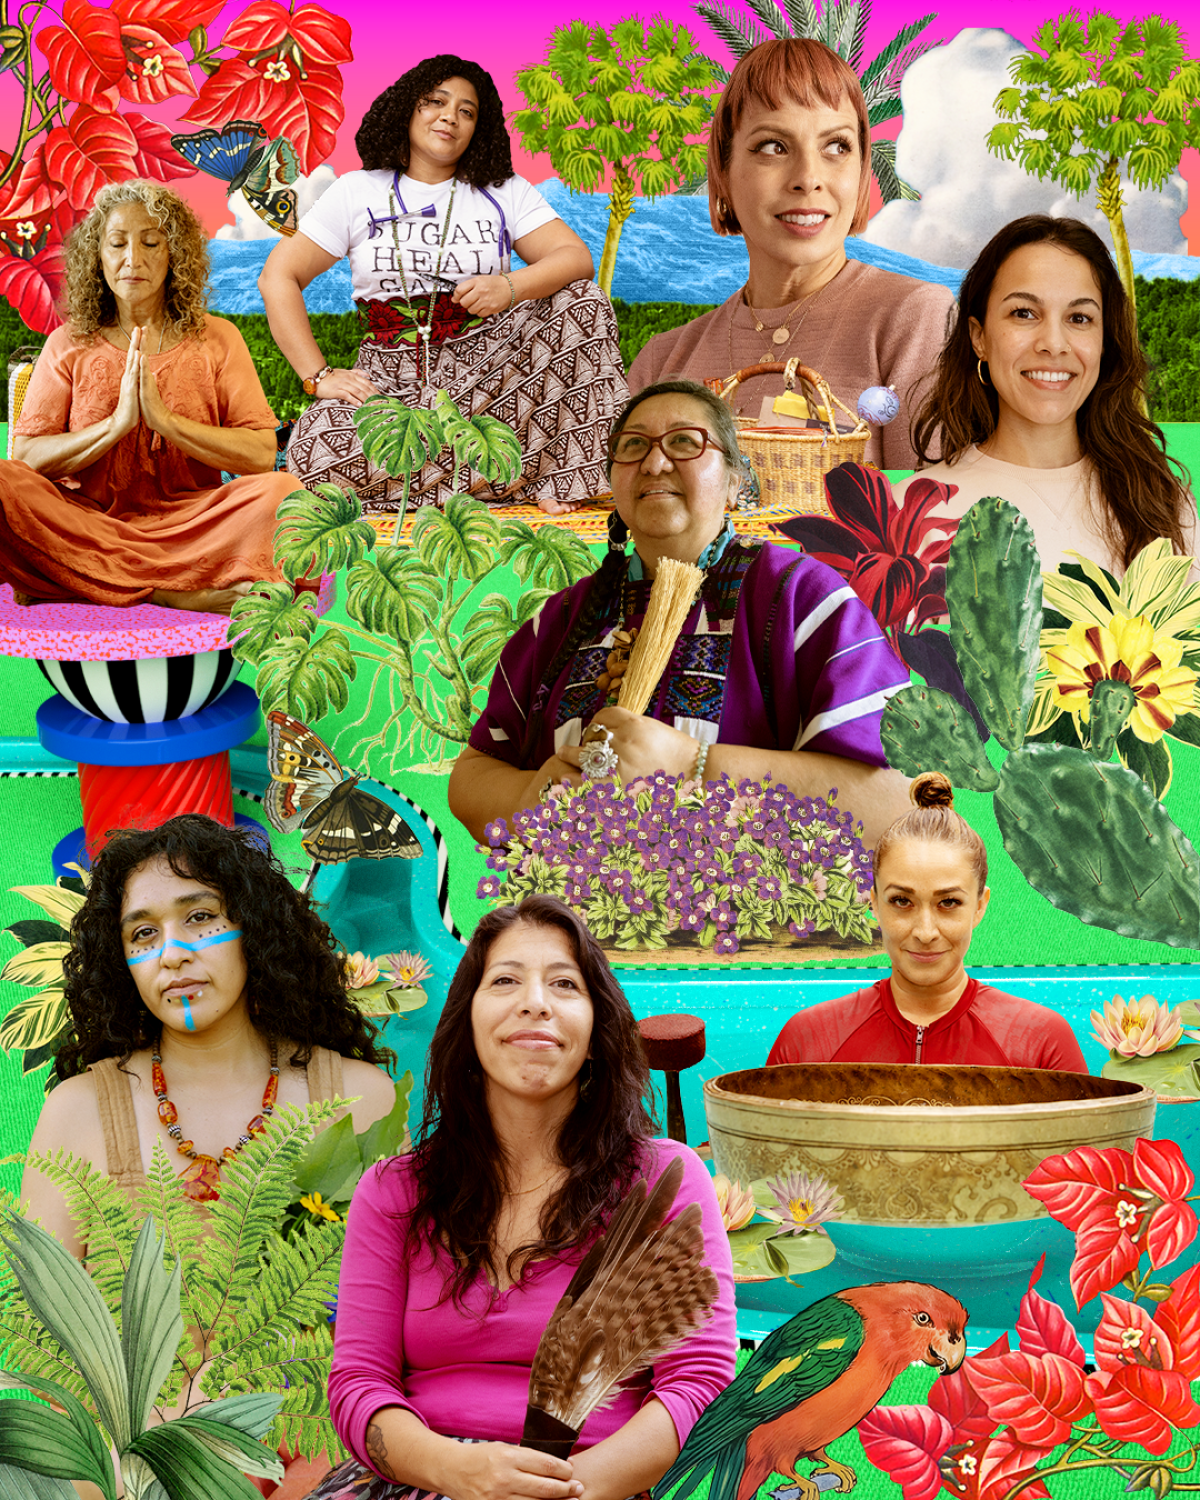 Collage of 8 women among images of plants 